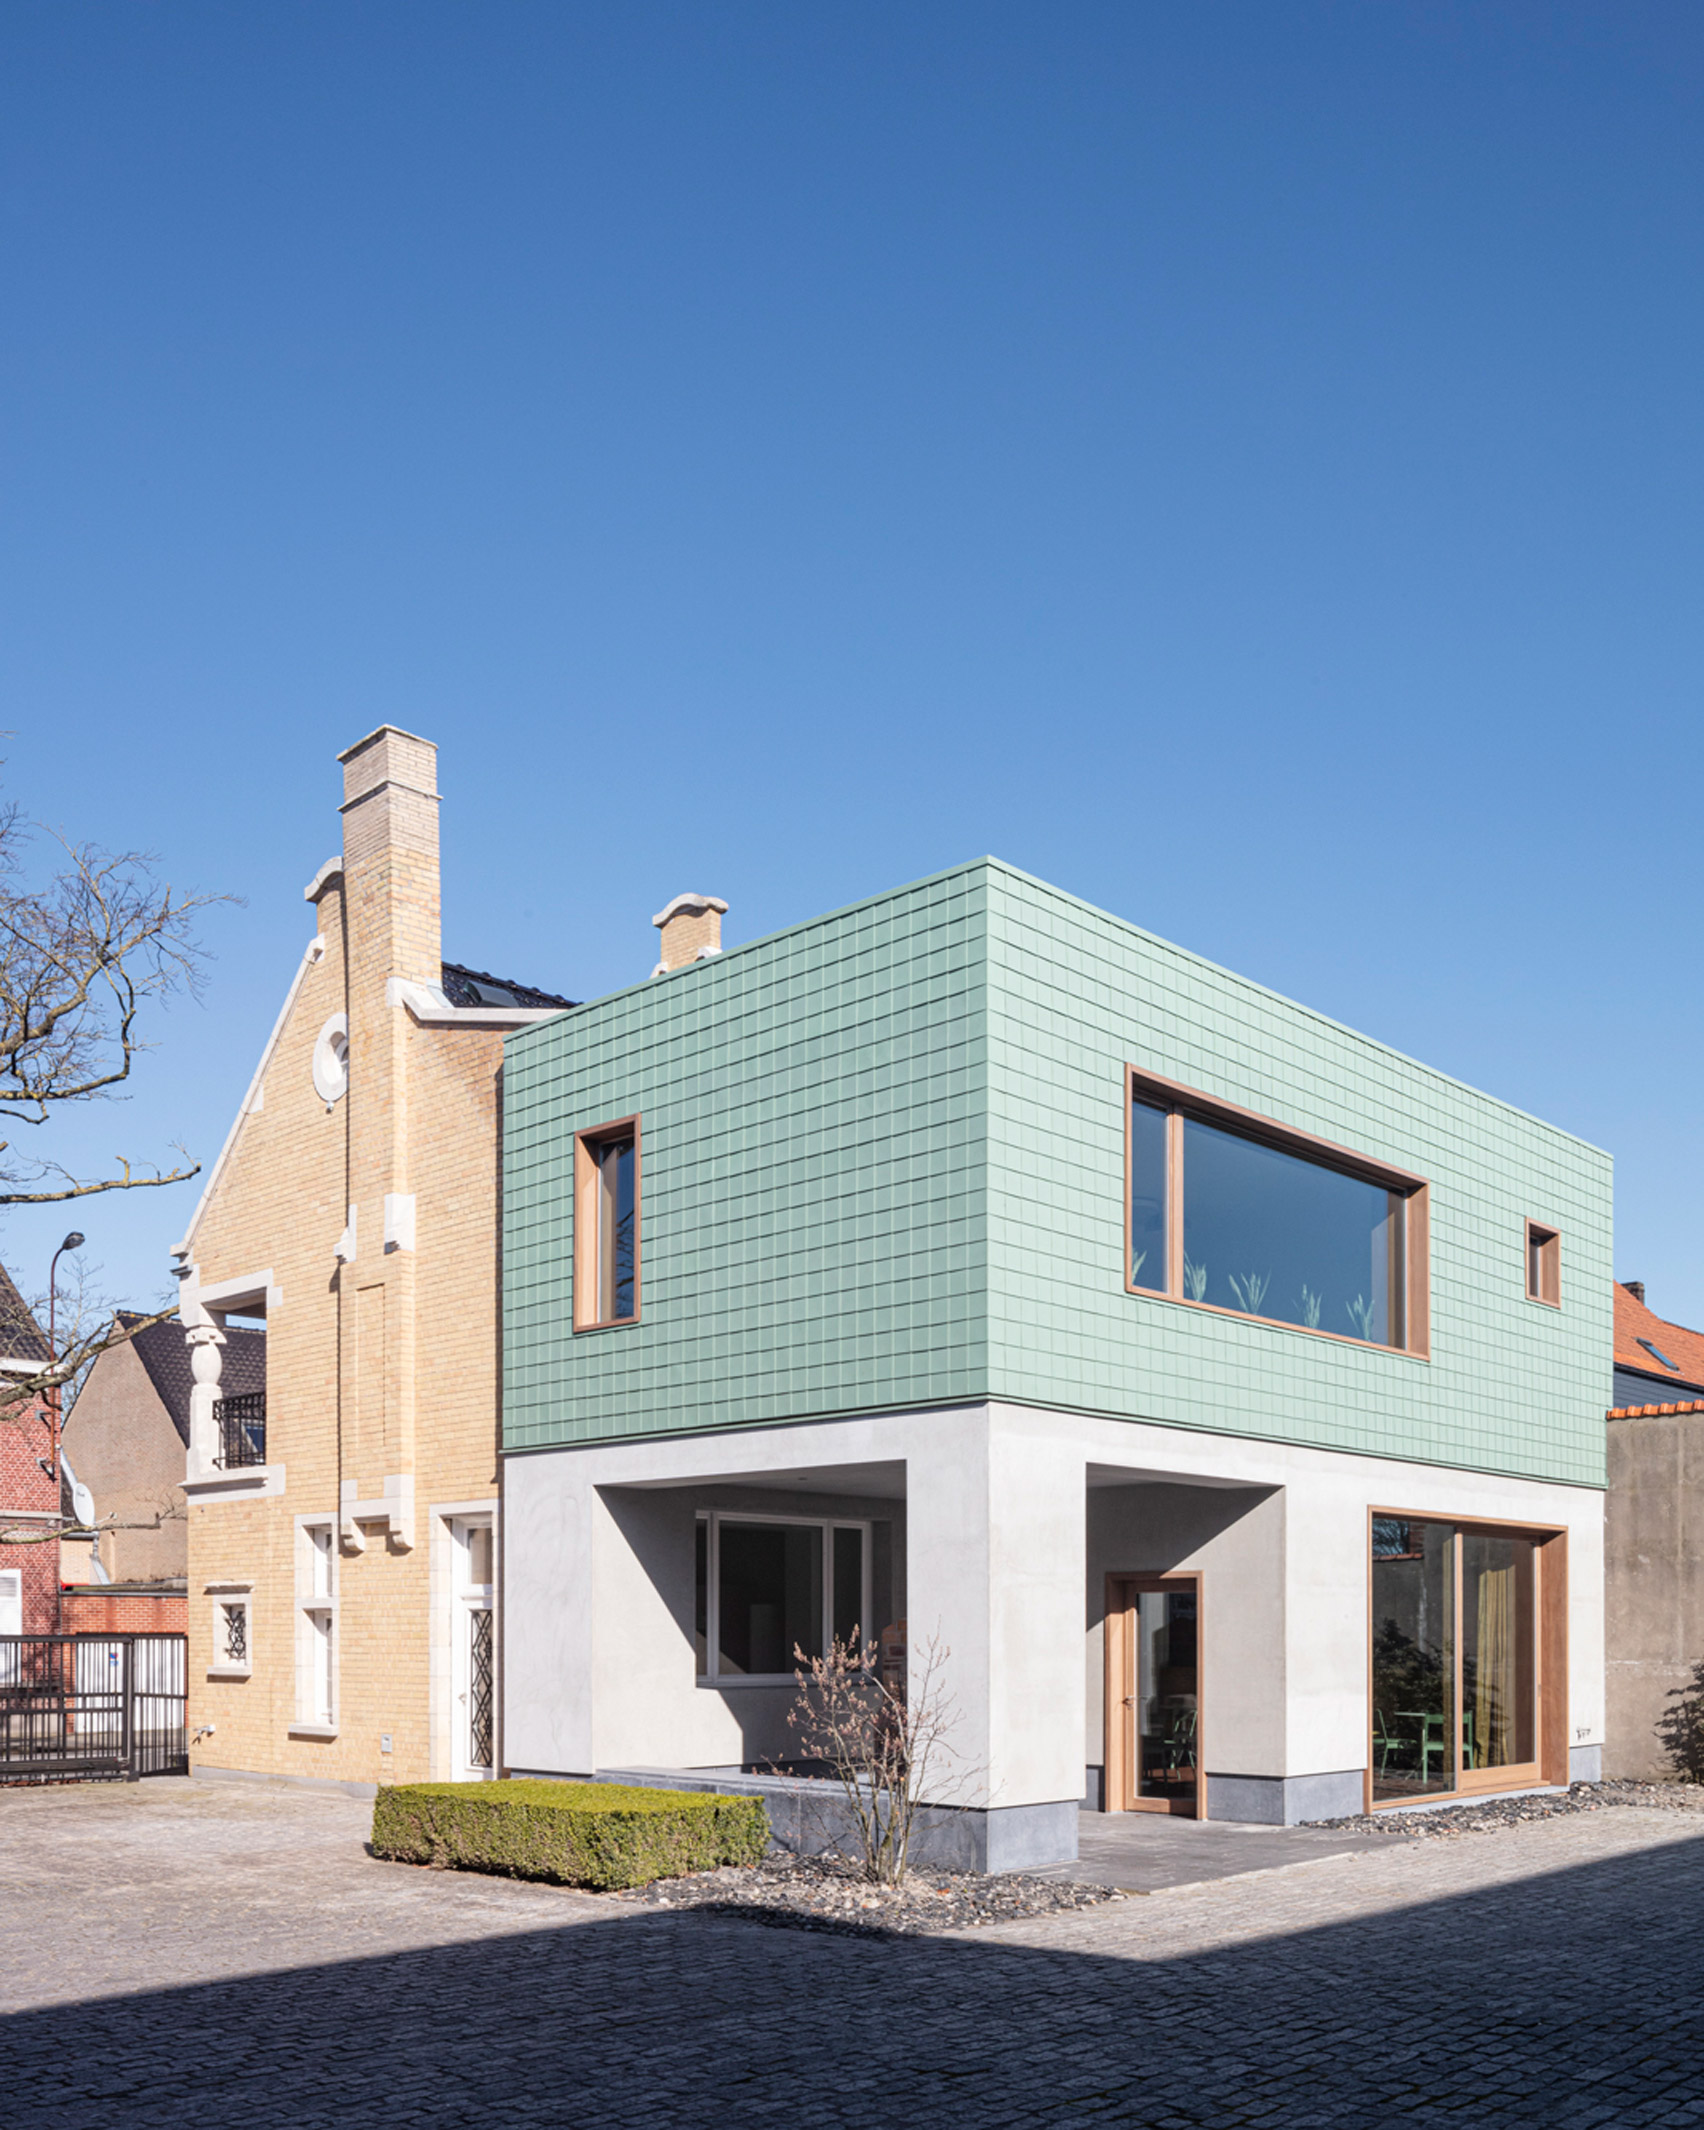 Grey plaster and copper cladding provides a contrast